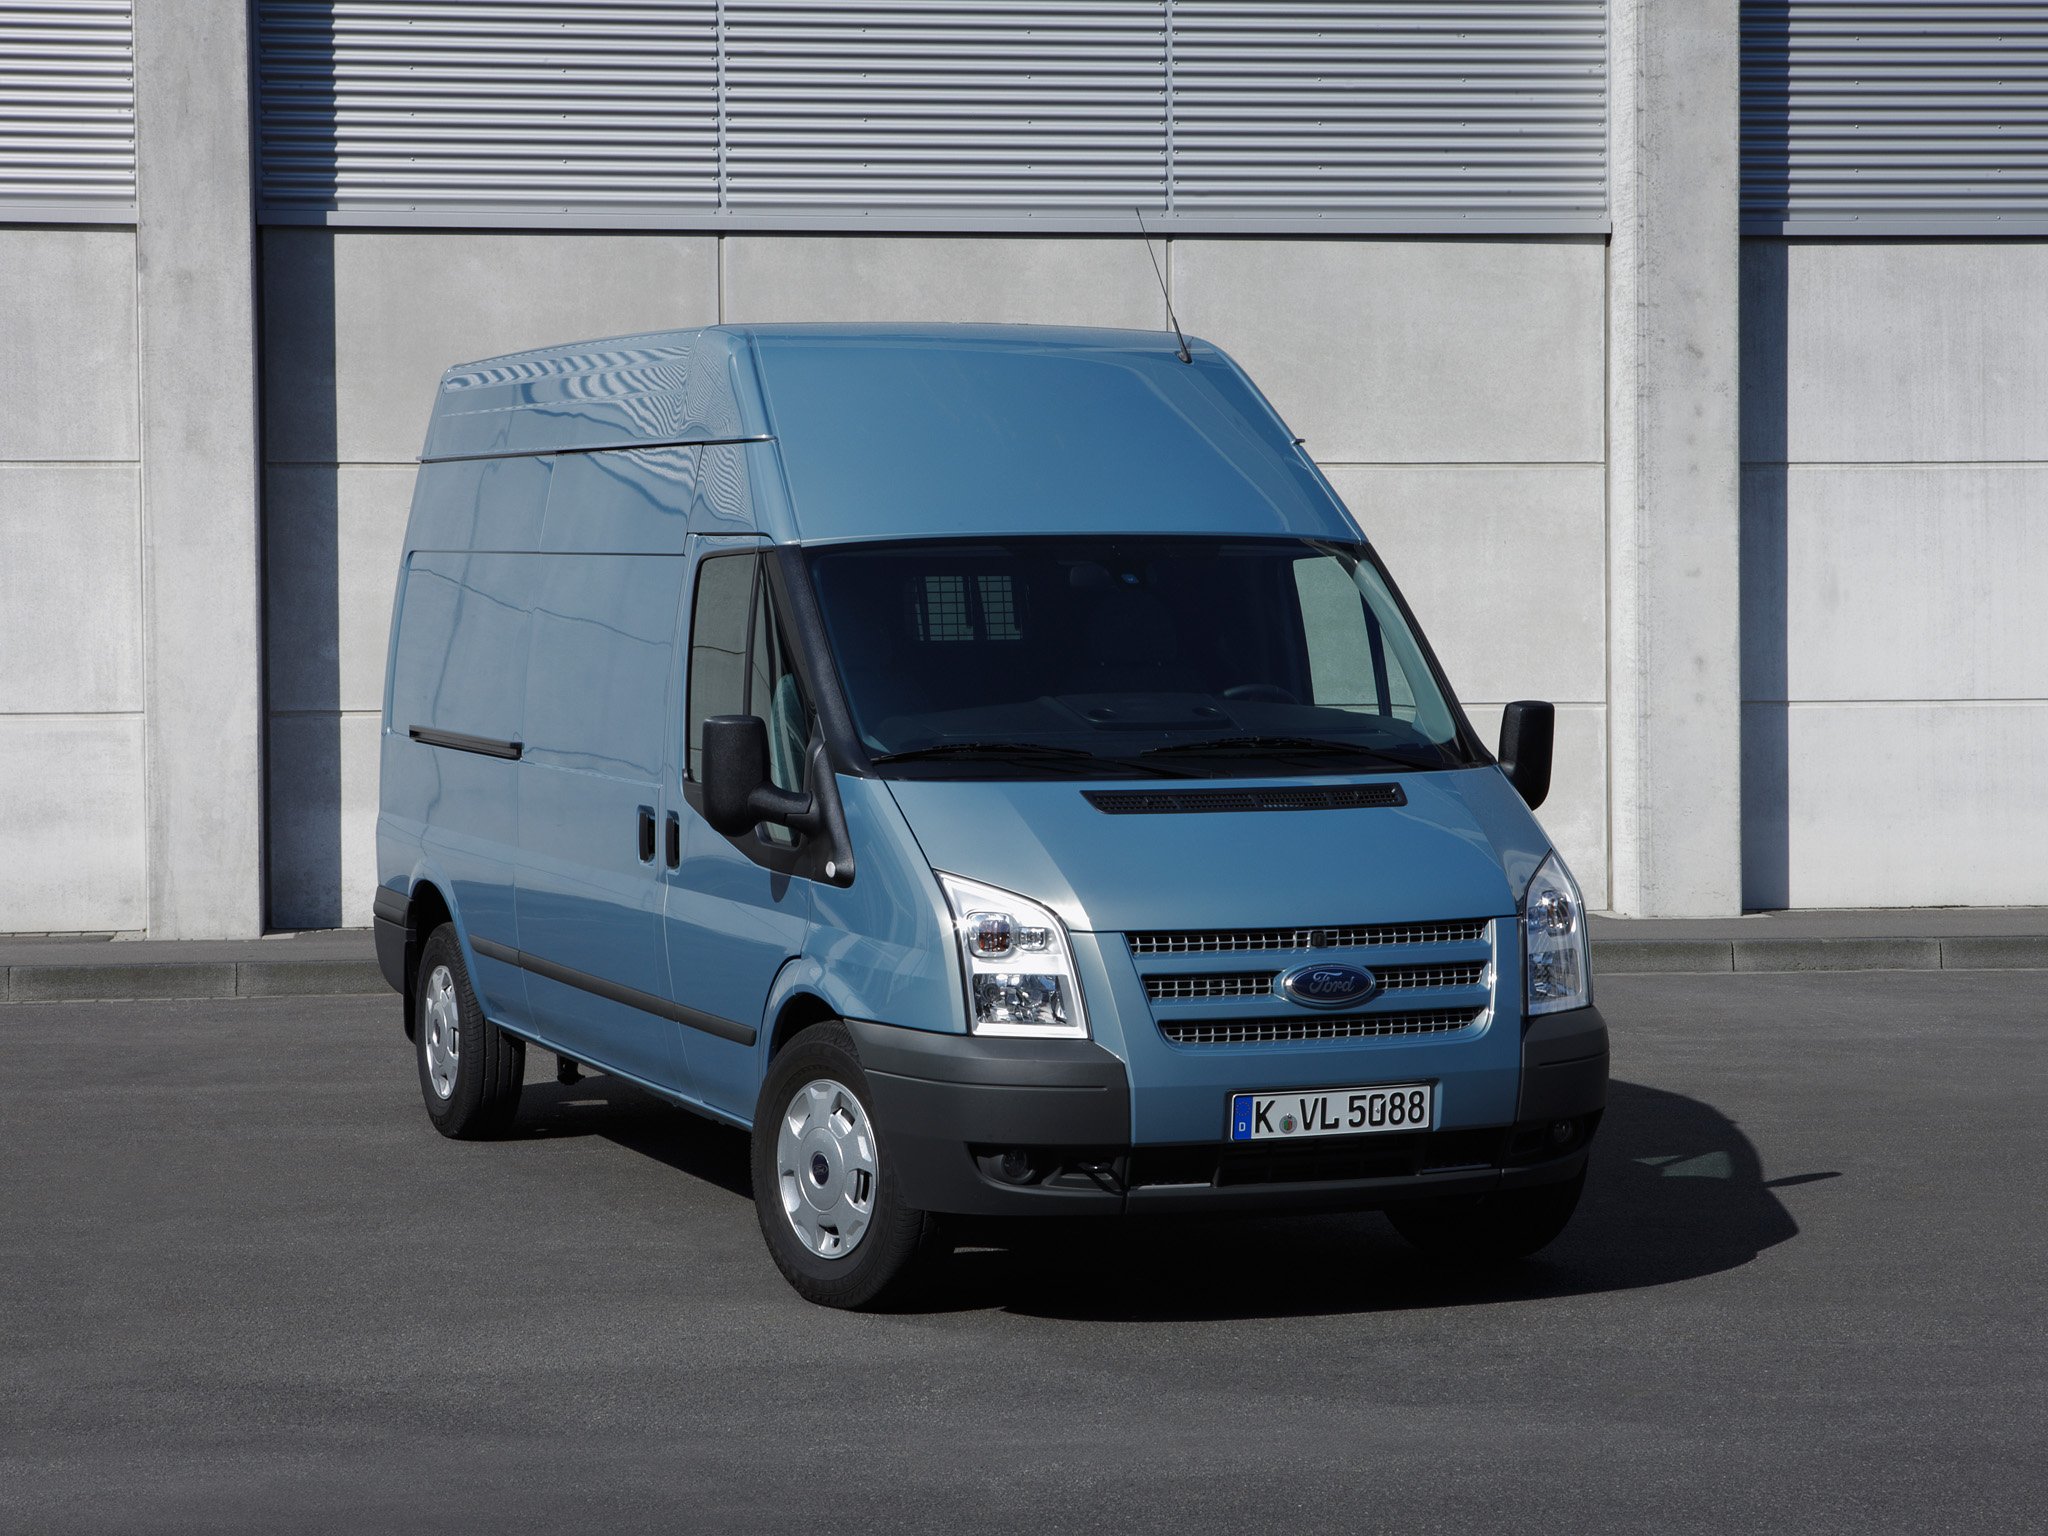 Форд транзит 20. Ford Transit 2011. Ford Transit LWB van. Ford Transit van 2011. Ford Transit LWB van 2006.